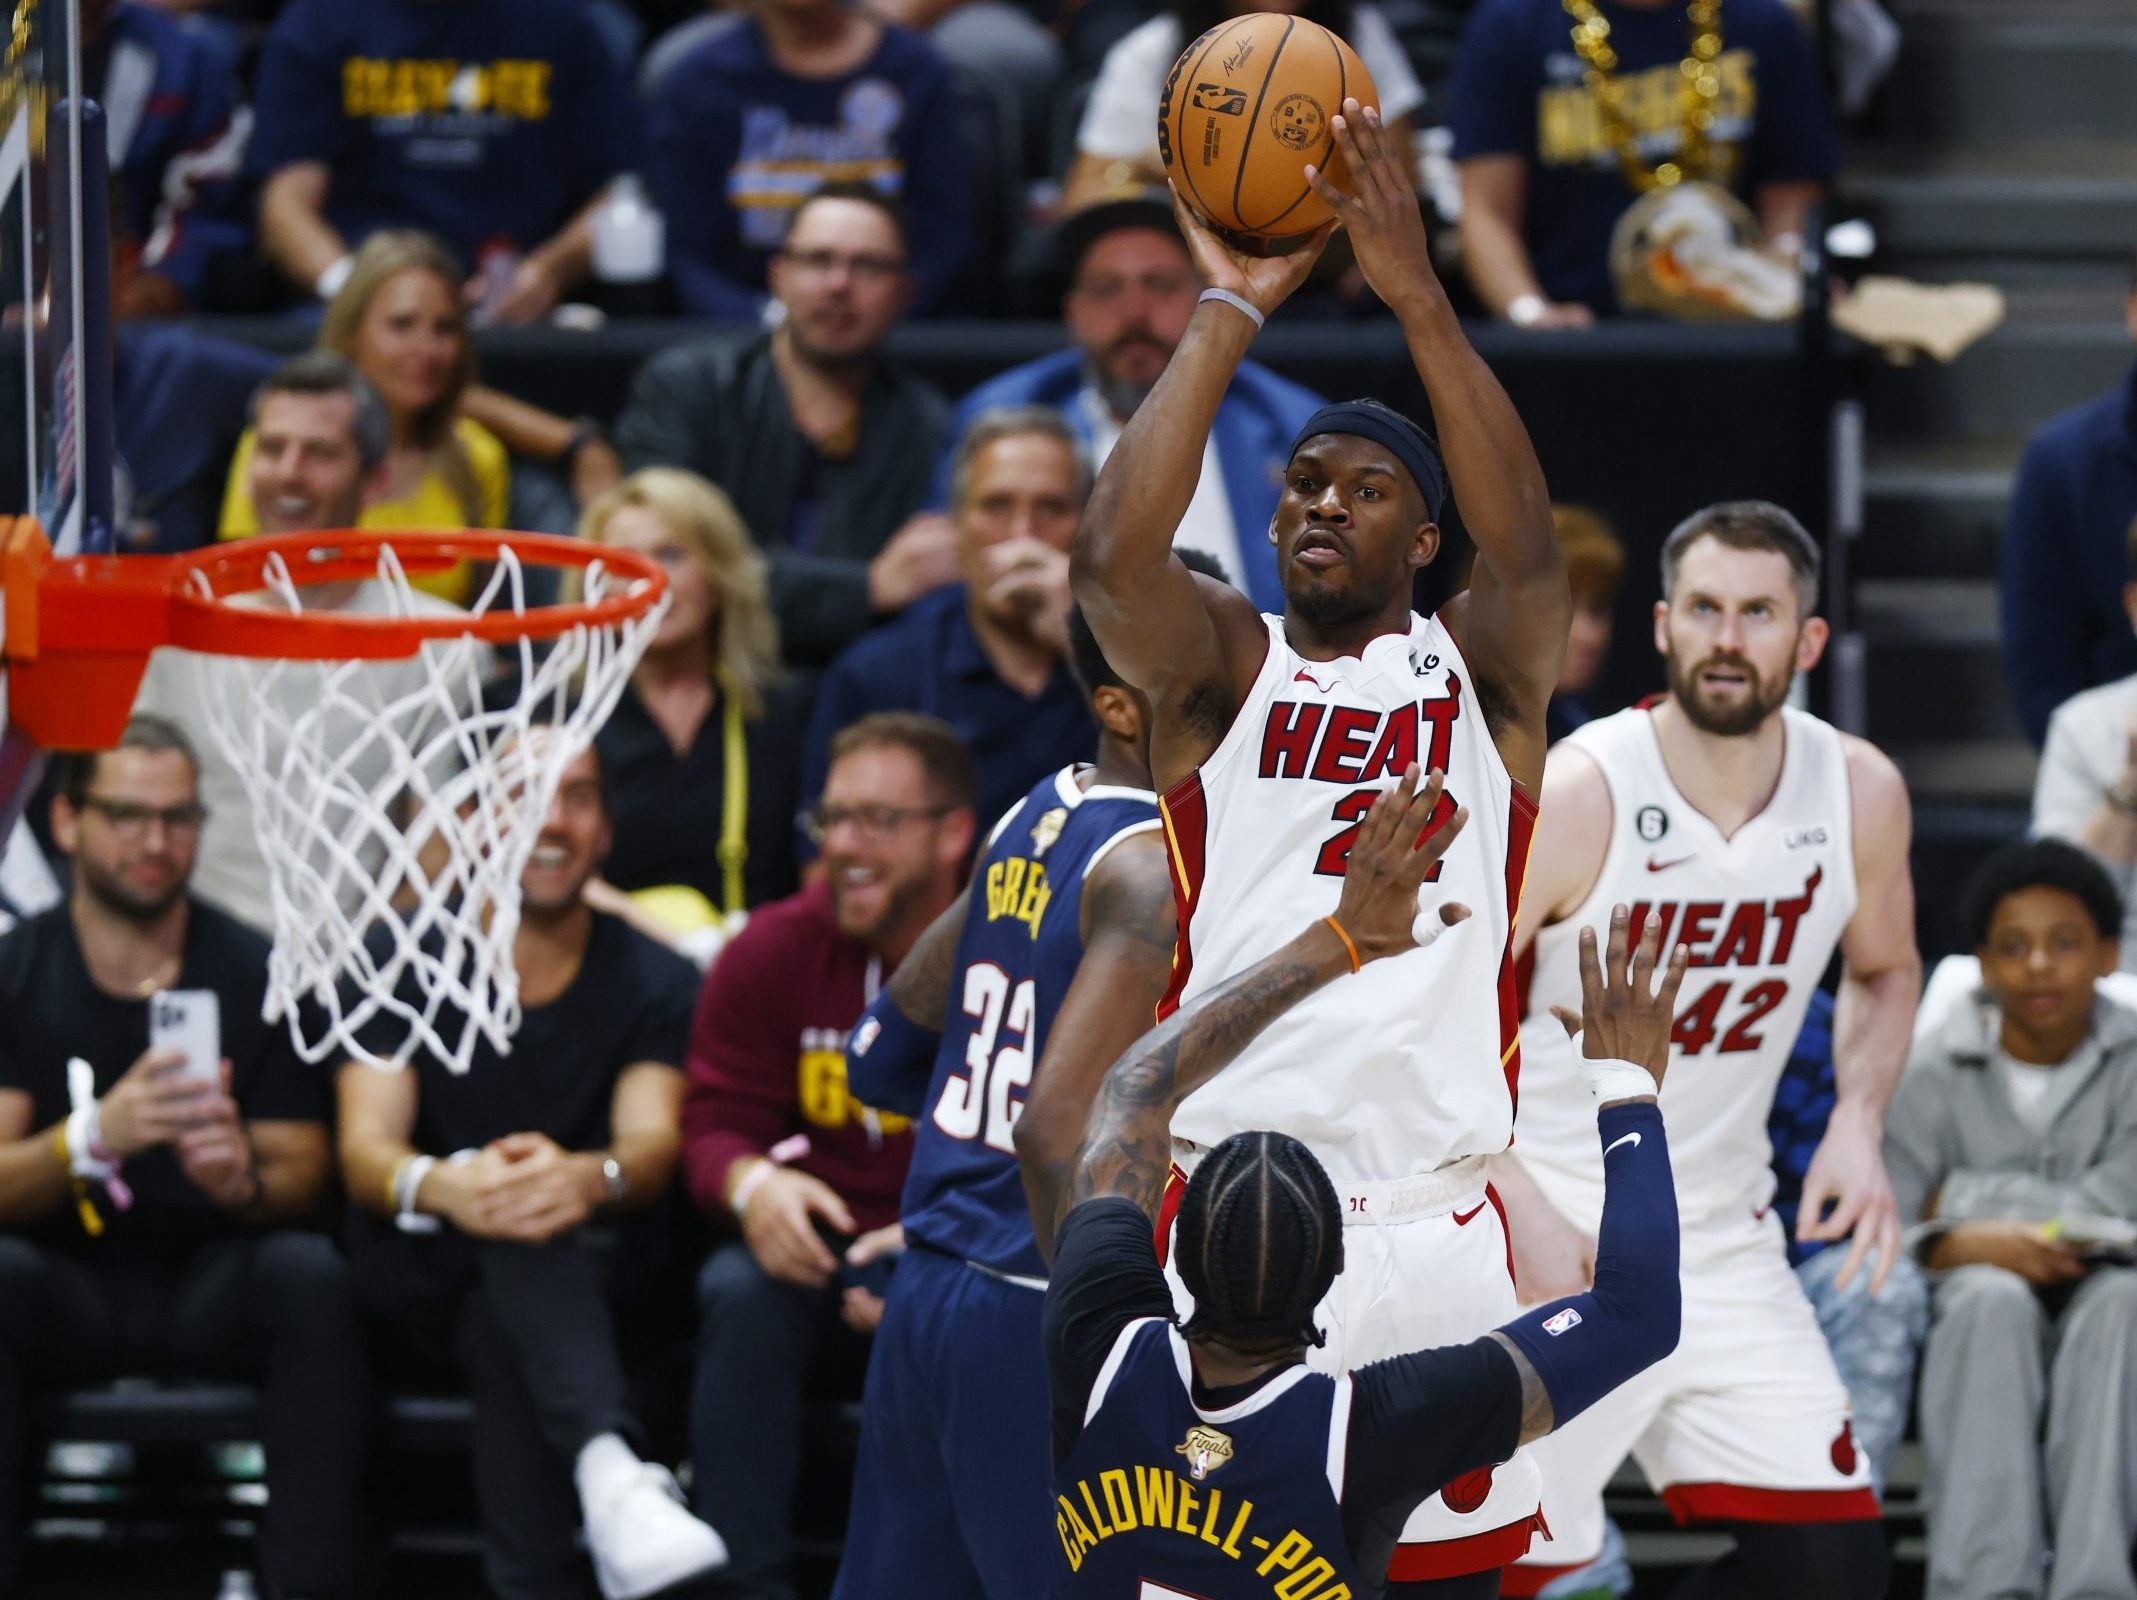 NBA News: How Kyle Lowry Is Thriving With Miami Heat To Begin Season